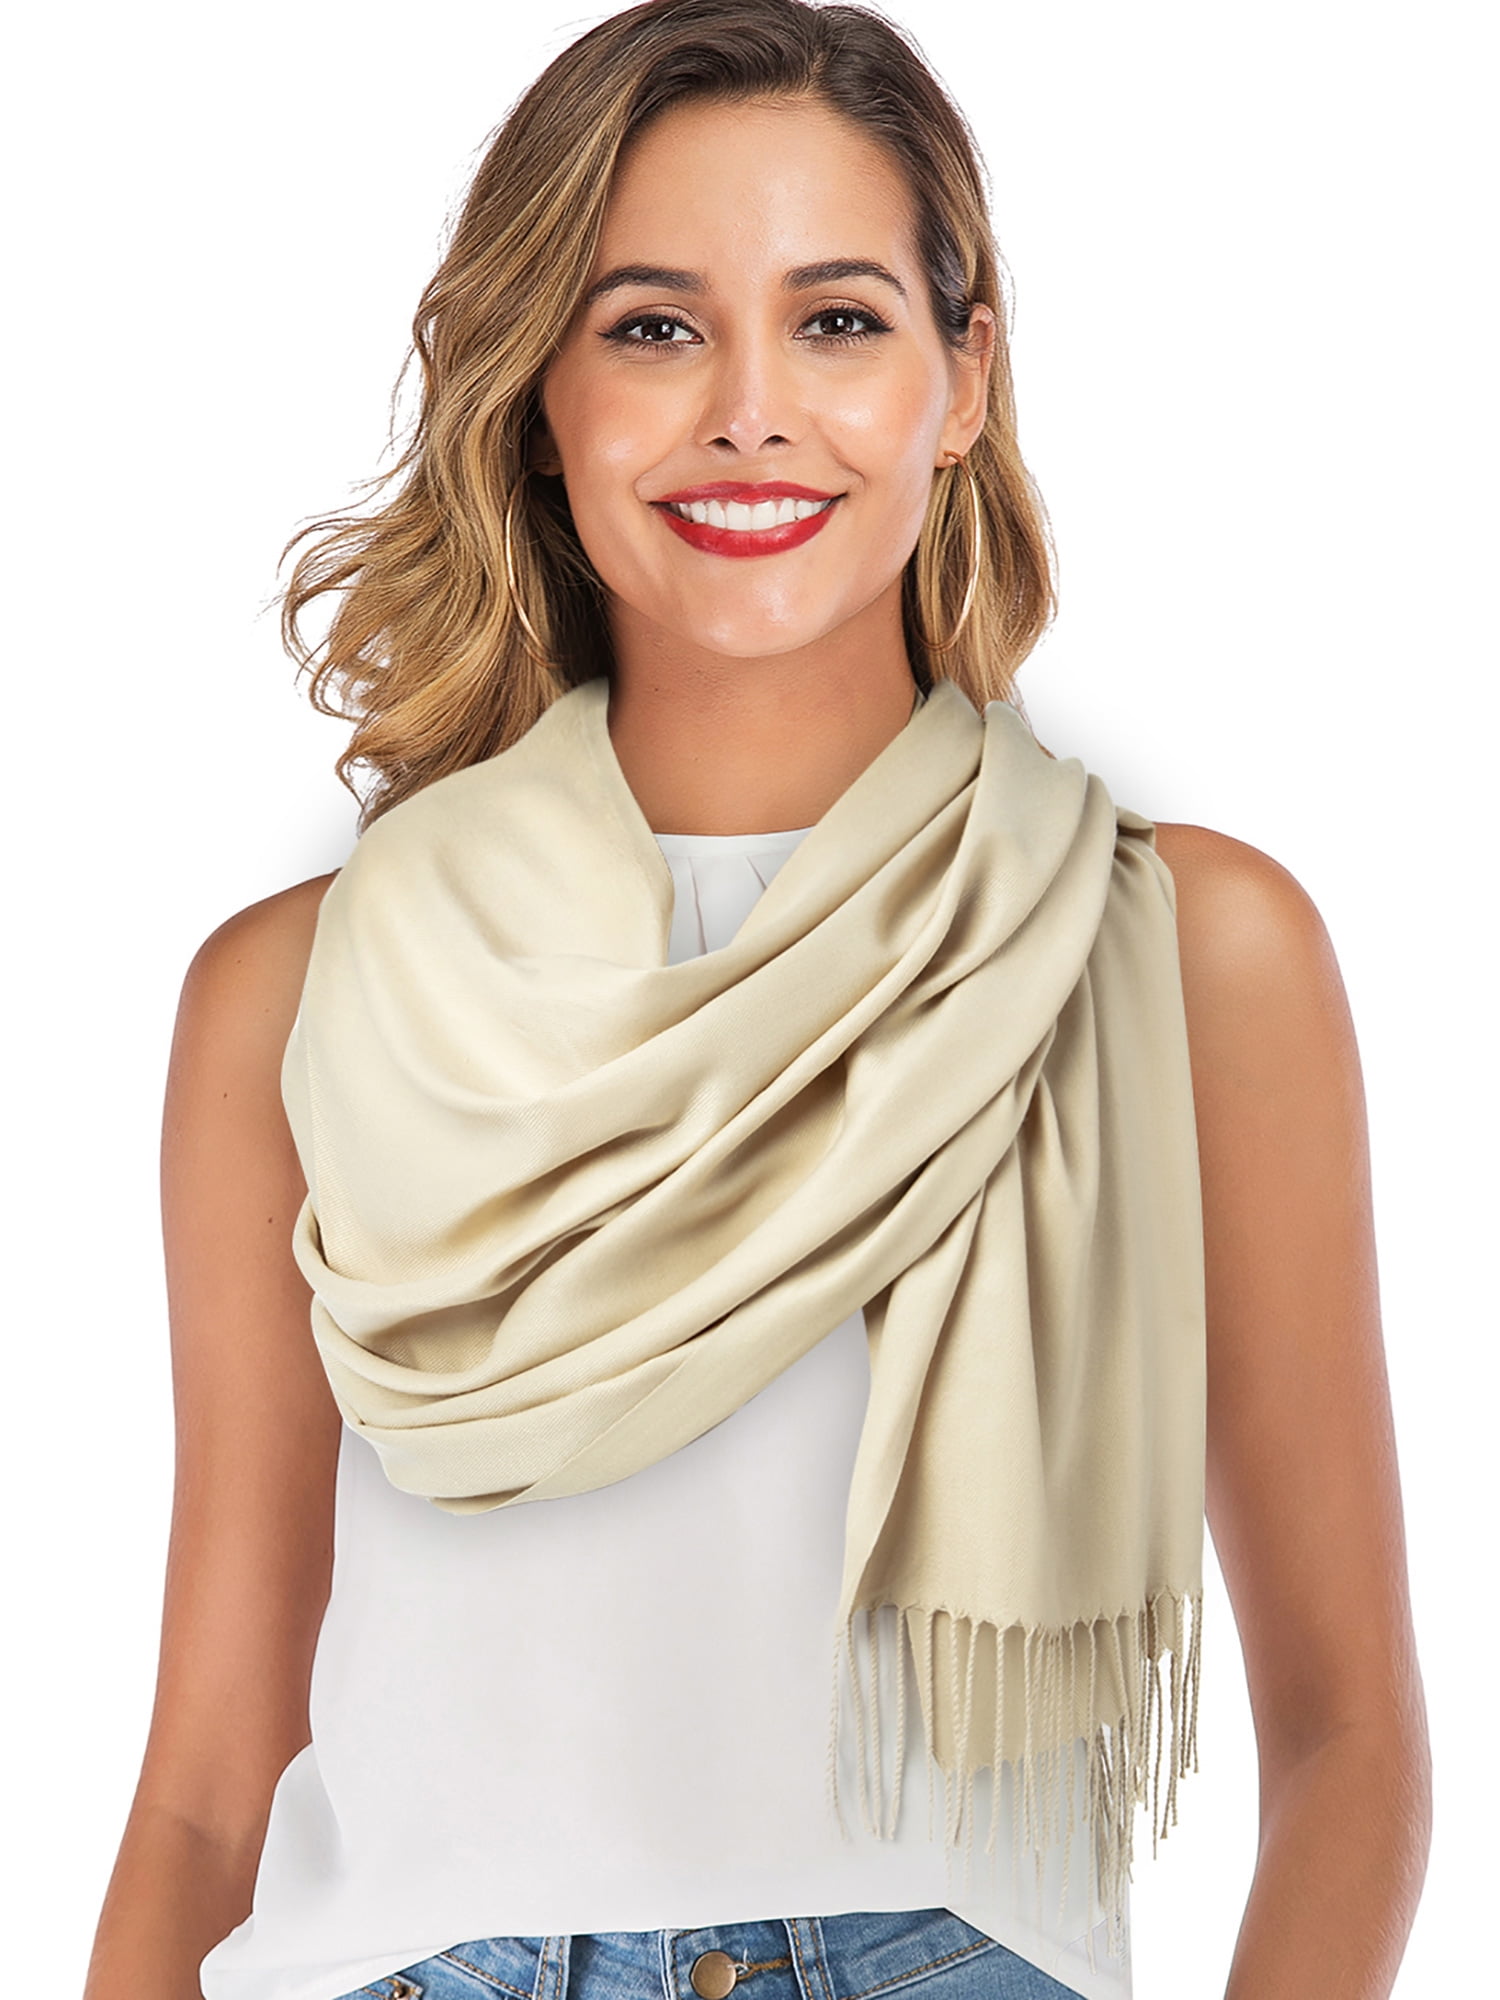 Fashion Women Girls Scarf Long Scarves Soft Cotton Wrap Shawl Stole Solid Color 